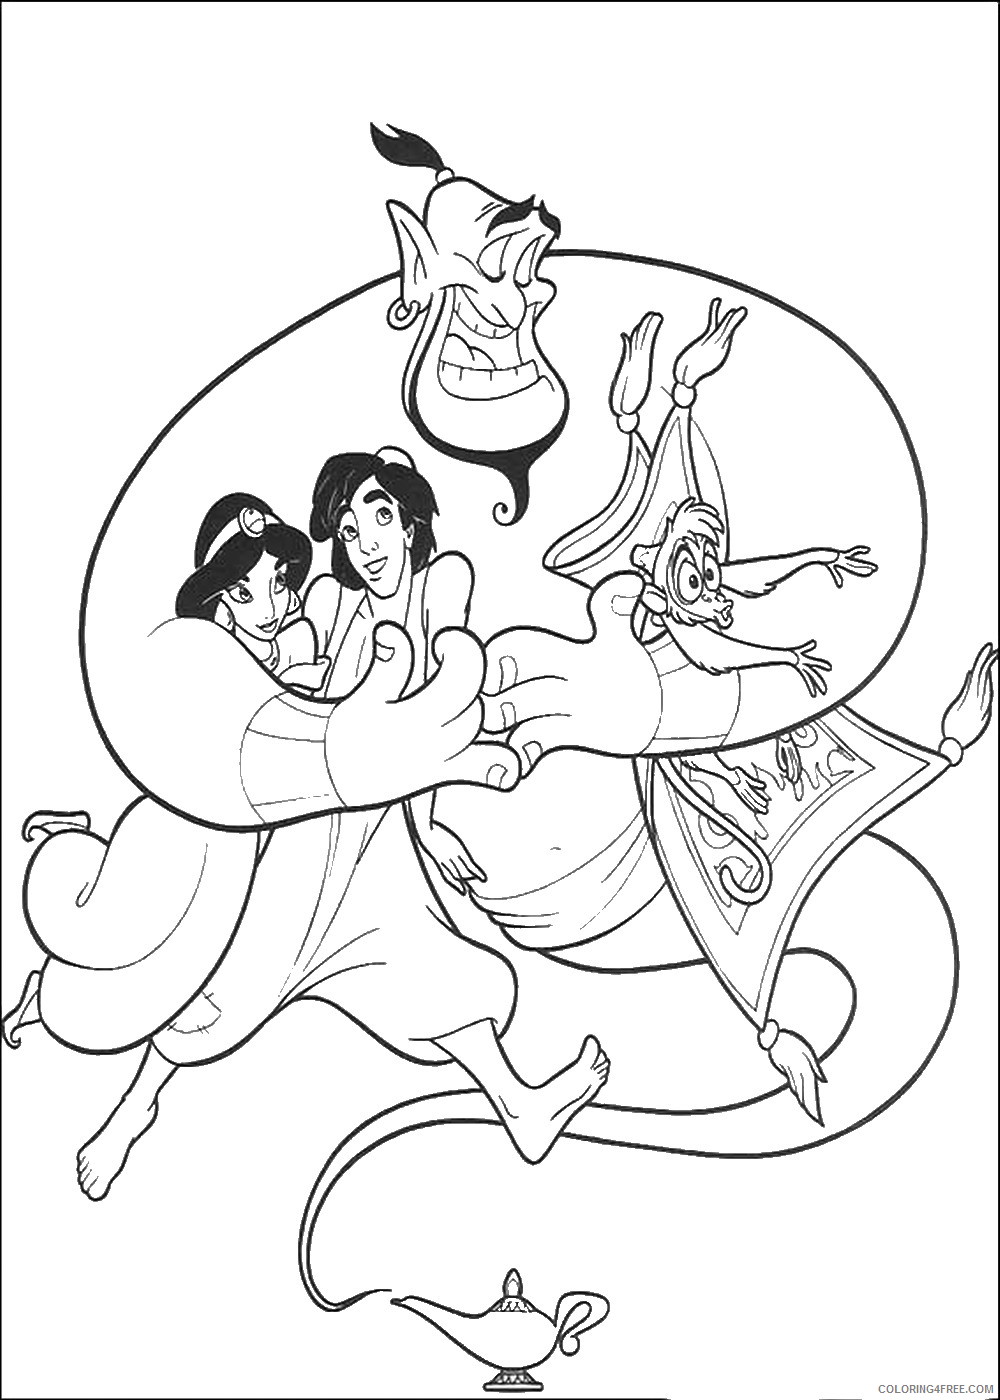 Aladdin Coloring Pages Cartoons aladdin_26 Printable 2020 0304 Coloring4free